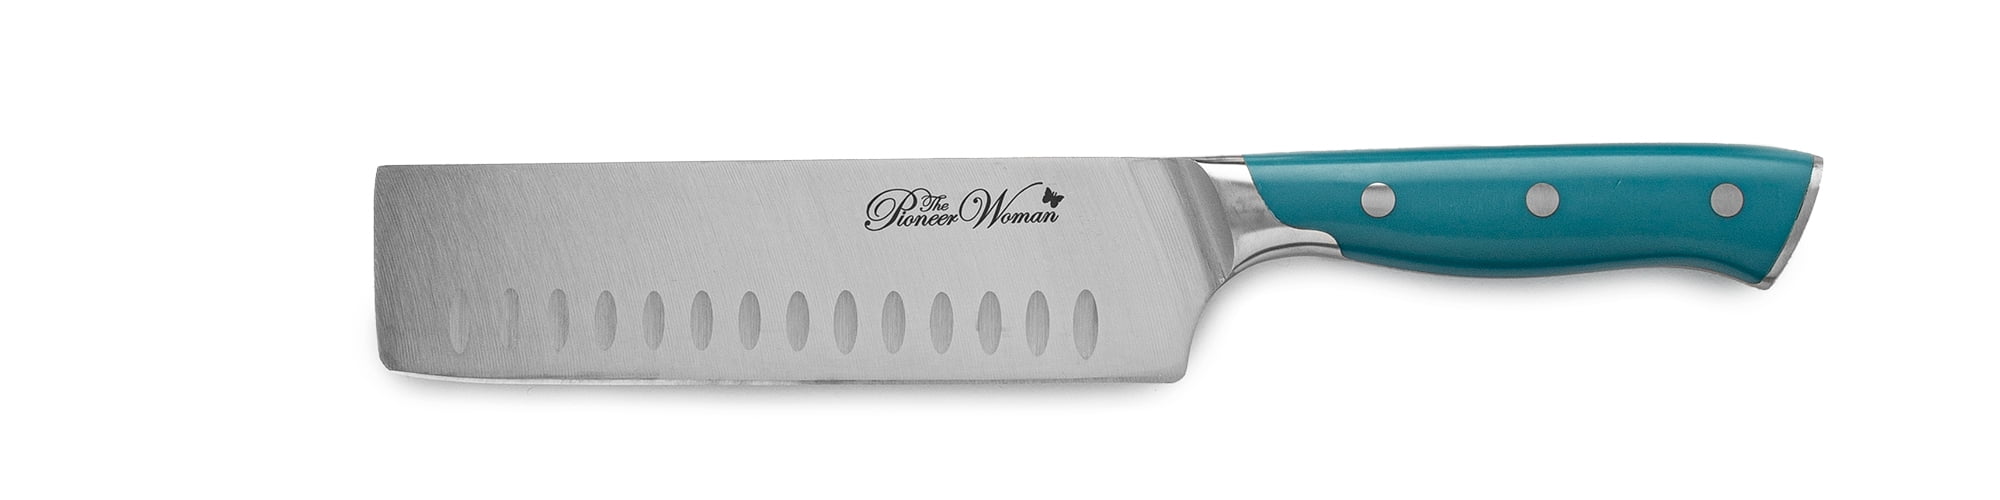 Comfy Grip Gray Stainless Steel 6.5 Vegetable Knife - 1 count box